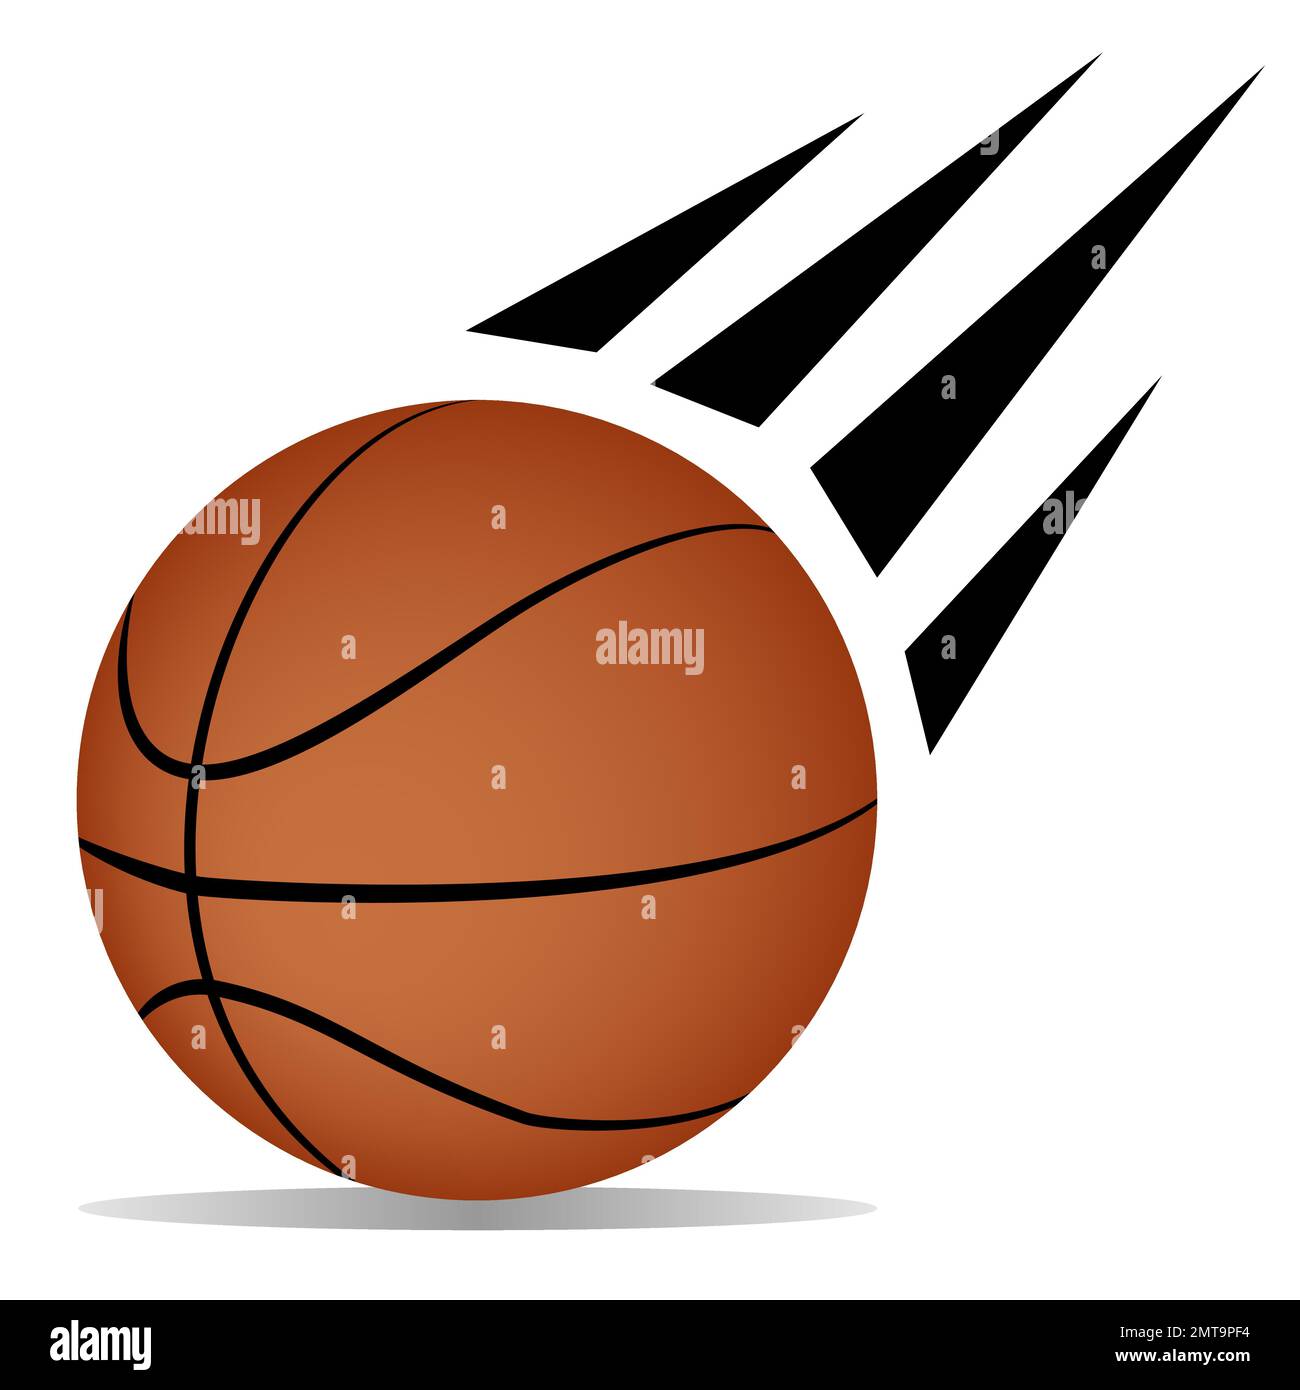 basketball movement icon object, vector graphic for design element, american sport game illustration Stock Vector